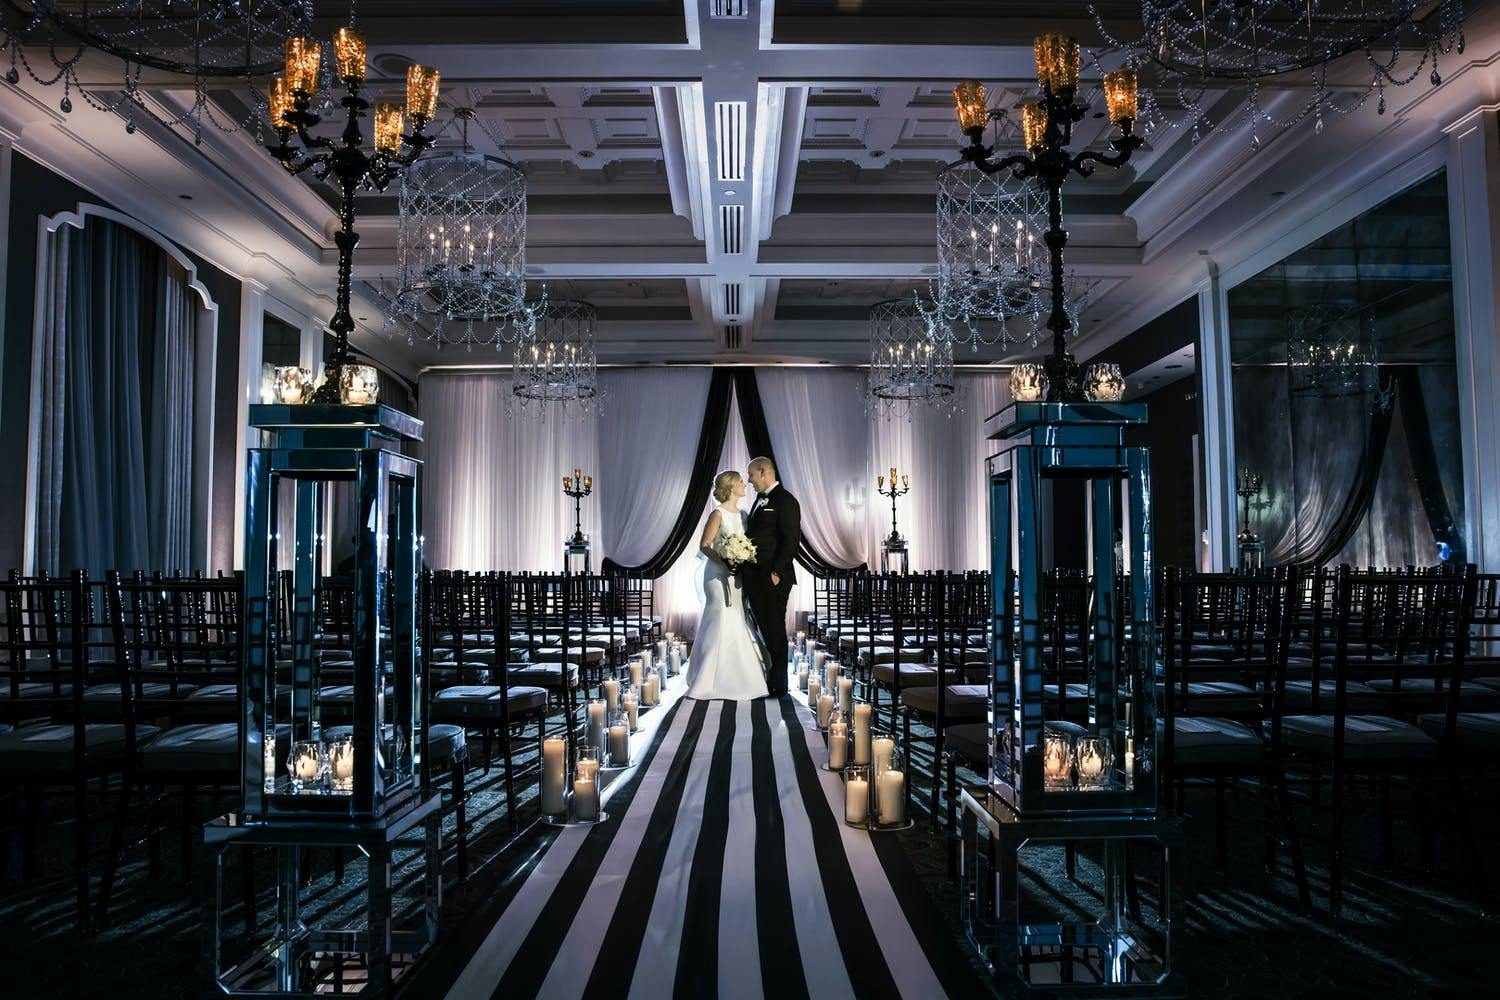 Wedding Ceremony With Black and White Wedding Décor | PartySlate